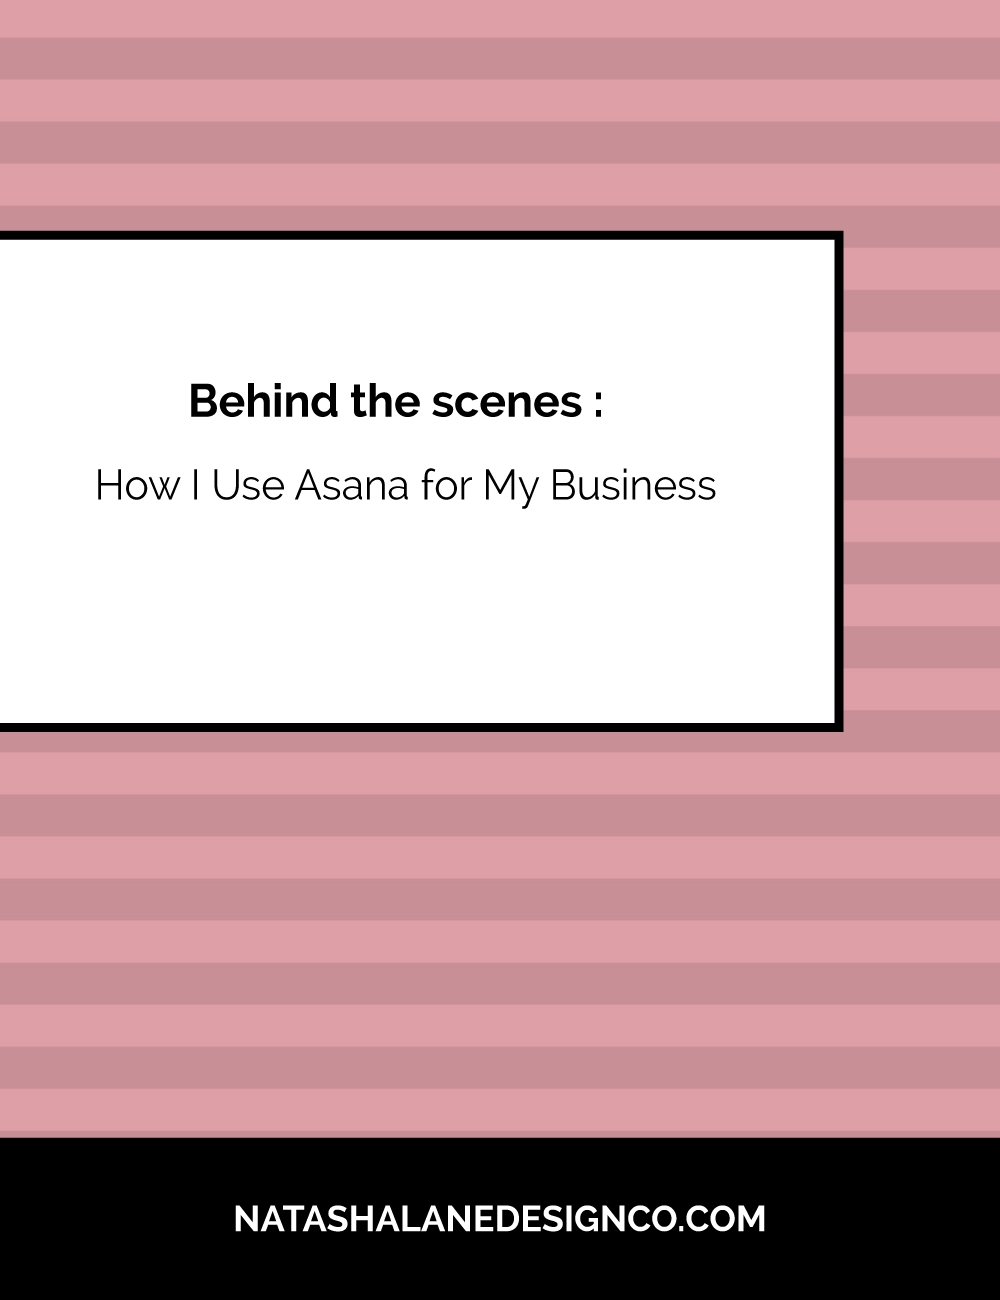 Behind the Scenes: How I use Asana for my business